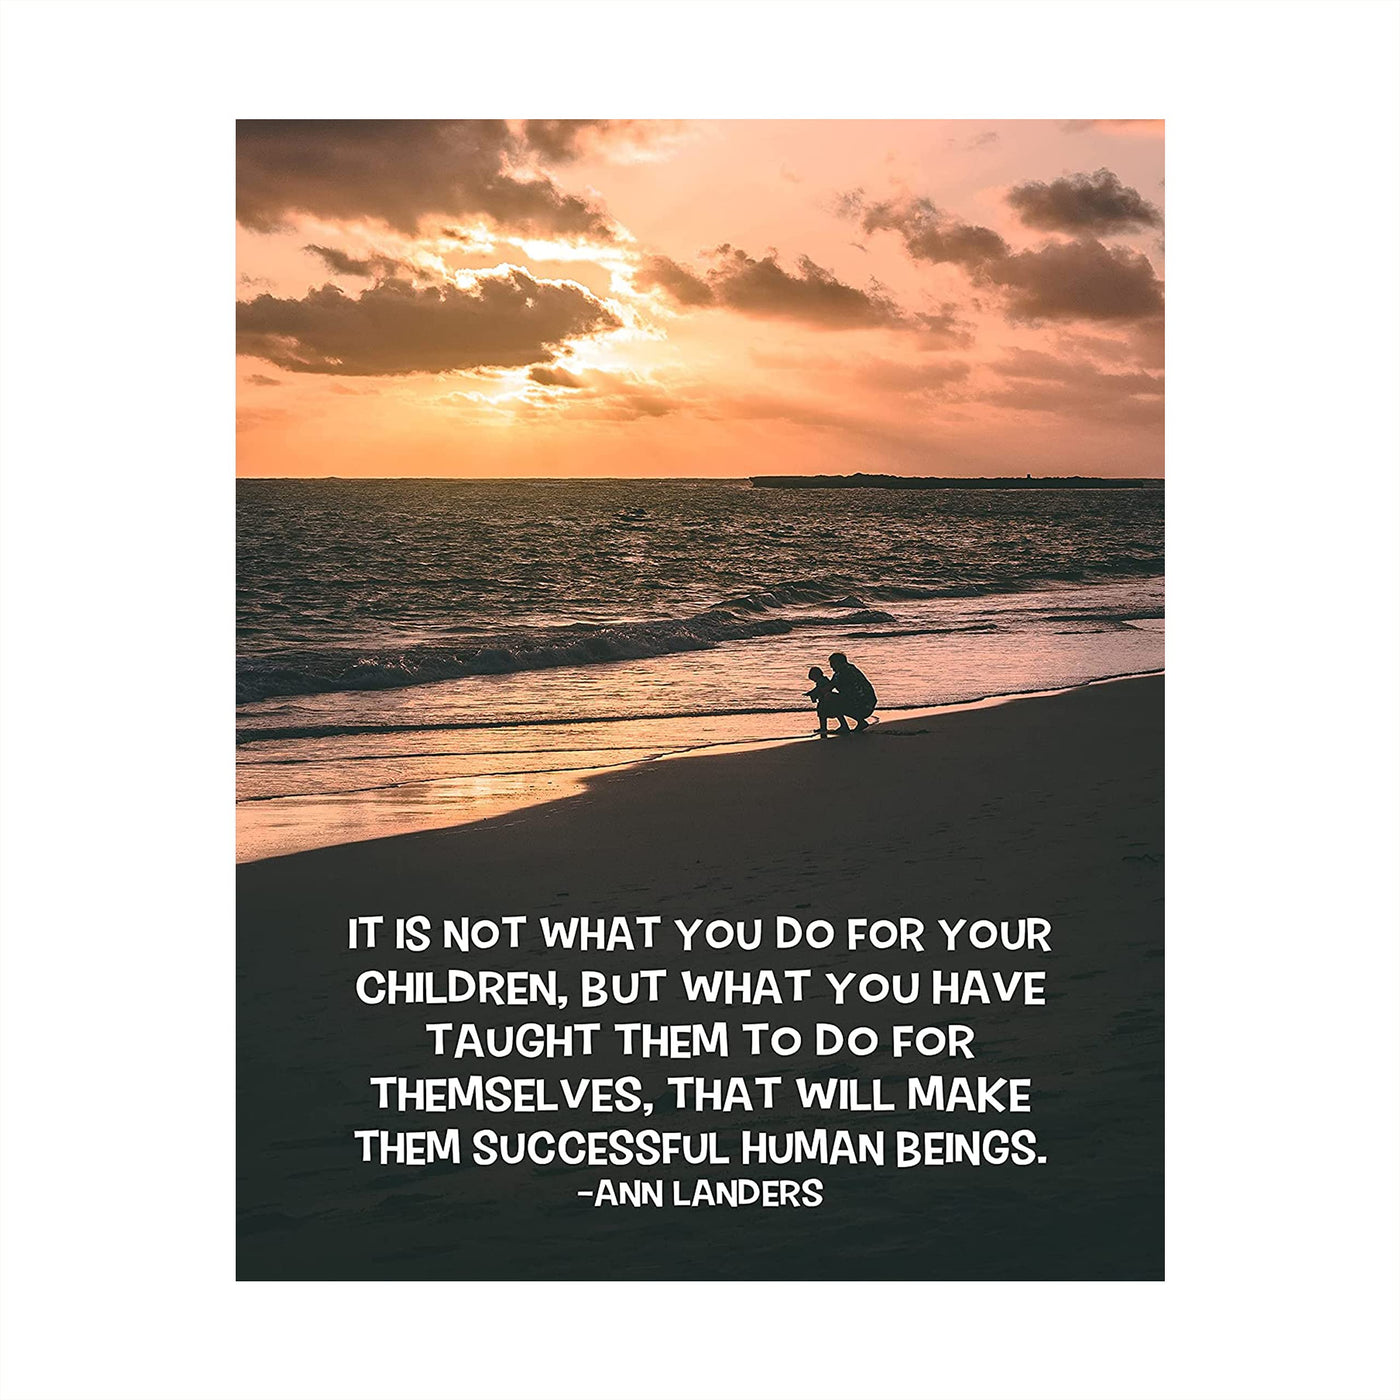 Ann Landers Quotes-"What You Have Taught Them" Family Wall Art-8 x 10" Inspirational Typographic Beach Print-Ready to Frame. Home-Office-School Decor. Great Gift-Positive Advice for All Parents!